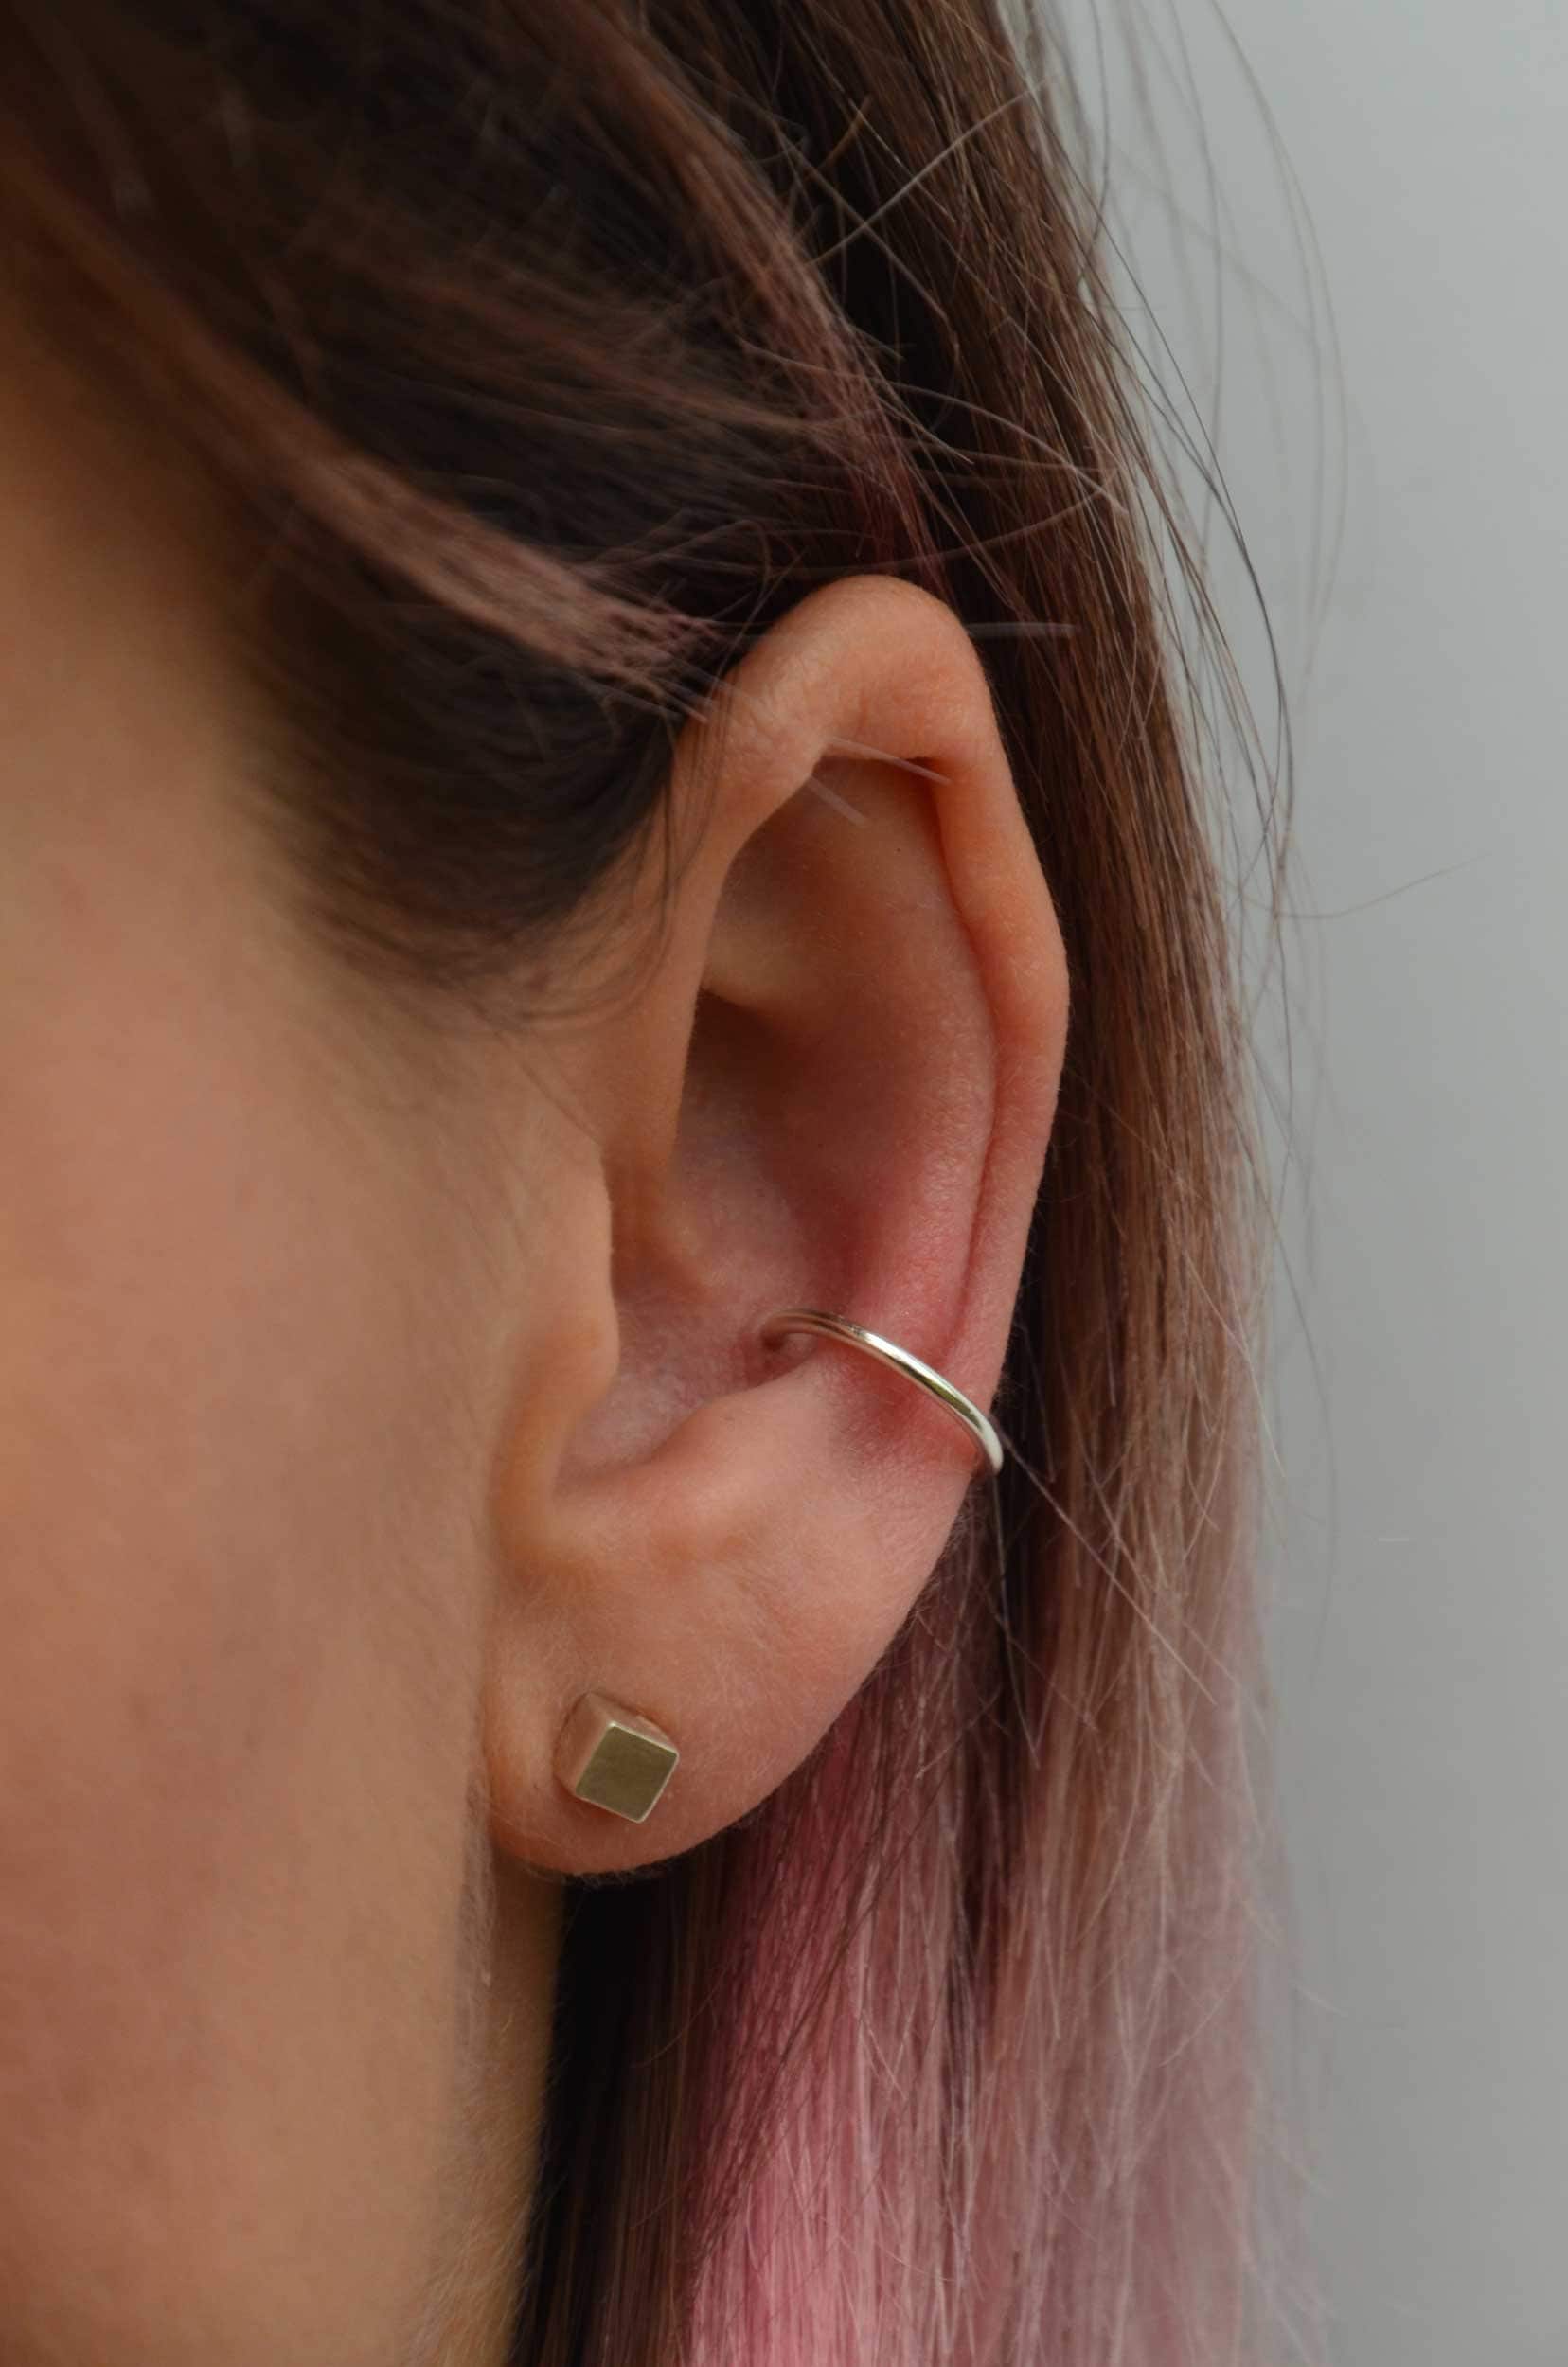 What You Need to Know About Wearing a Conch Jewelry Hoop – Pierced